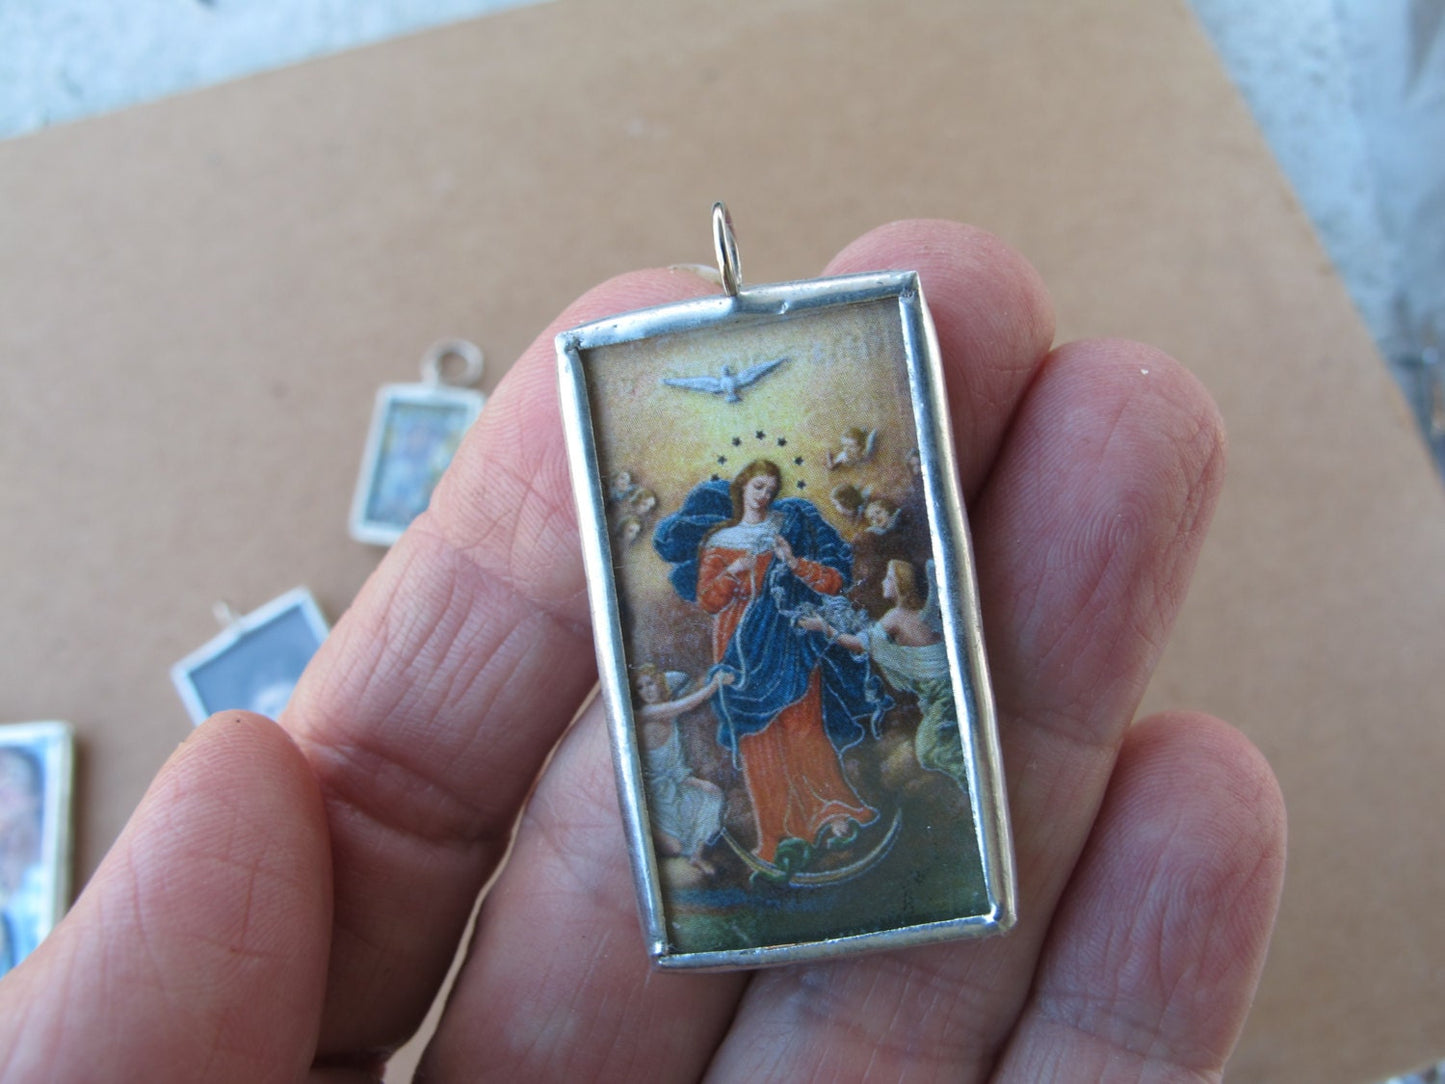 Our Lady - Untier of Knots - Undoer of Knots - Pope Francis Favorite - Glass and Solder Pendant - Catholic Gifts